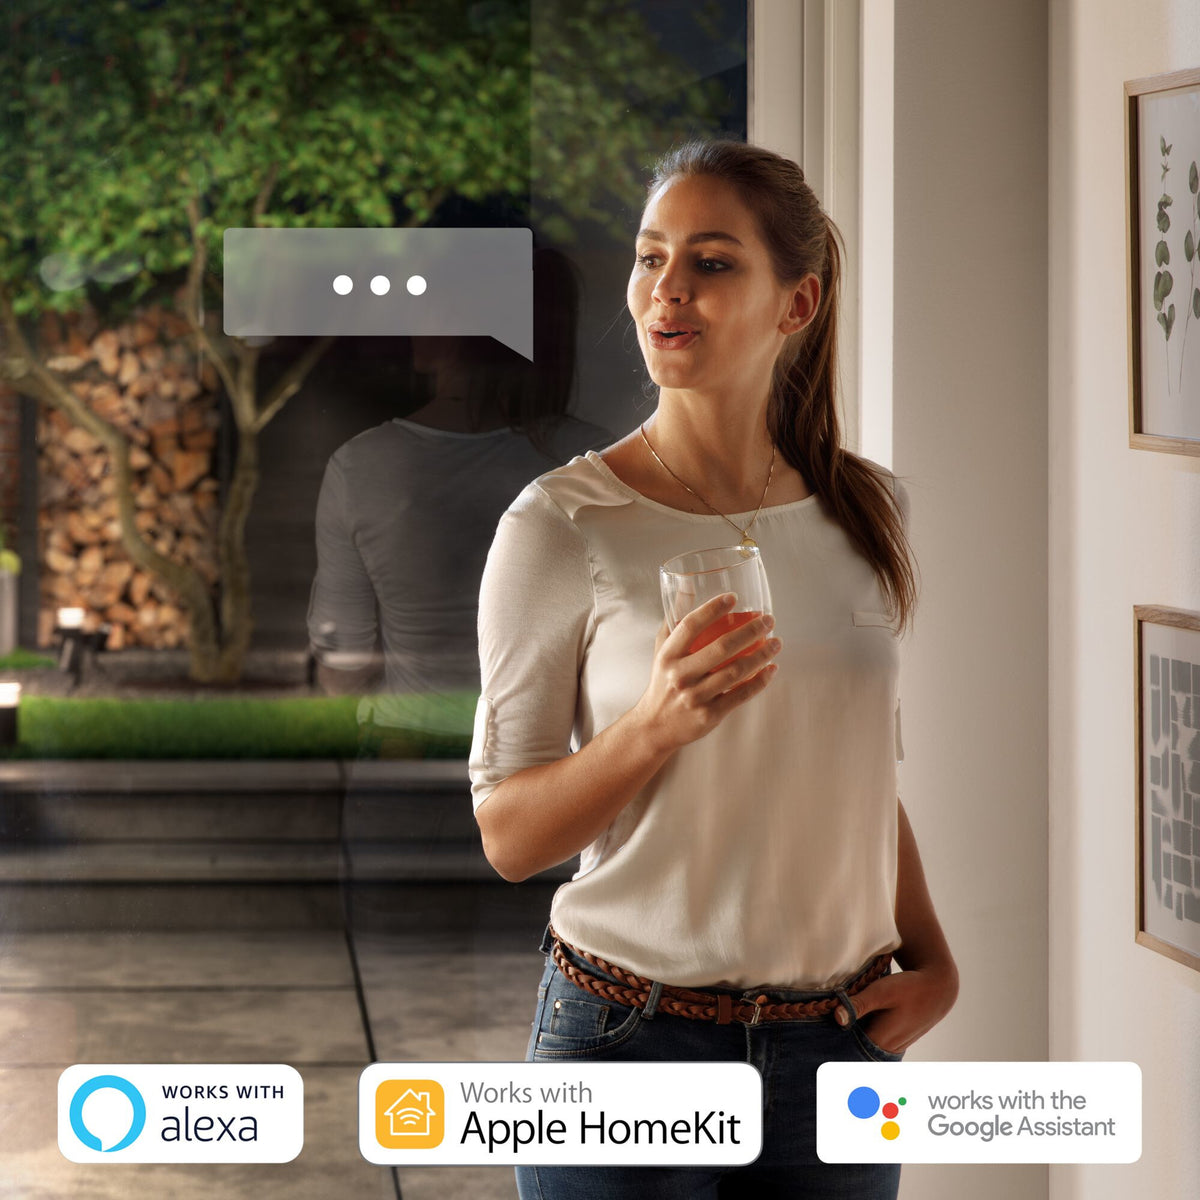 Philips Hue Resonate Outdoor wall light in Stainless Steel - White and colour ambience